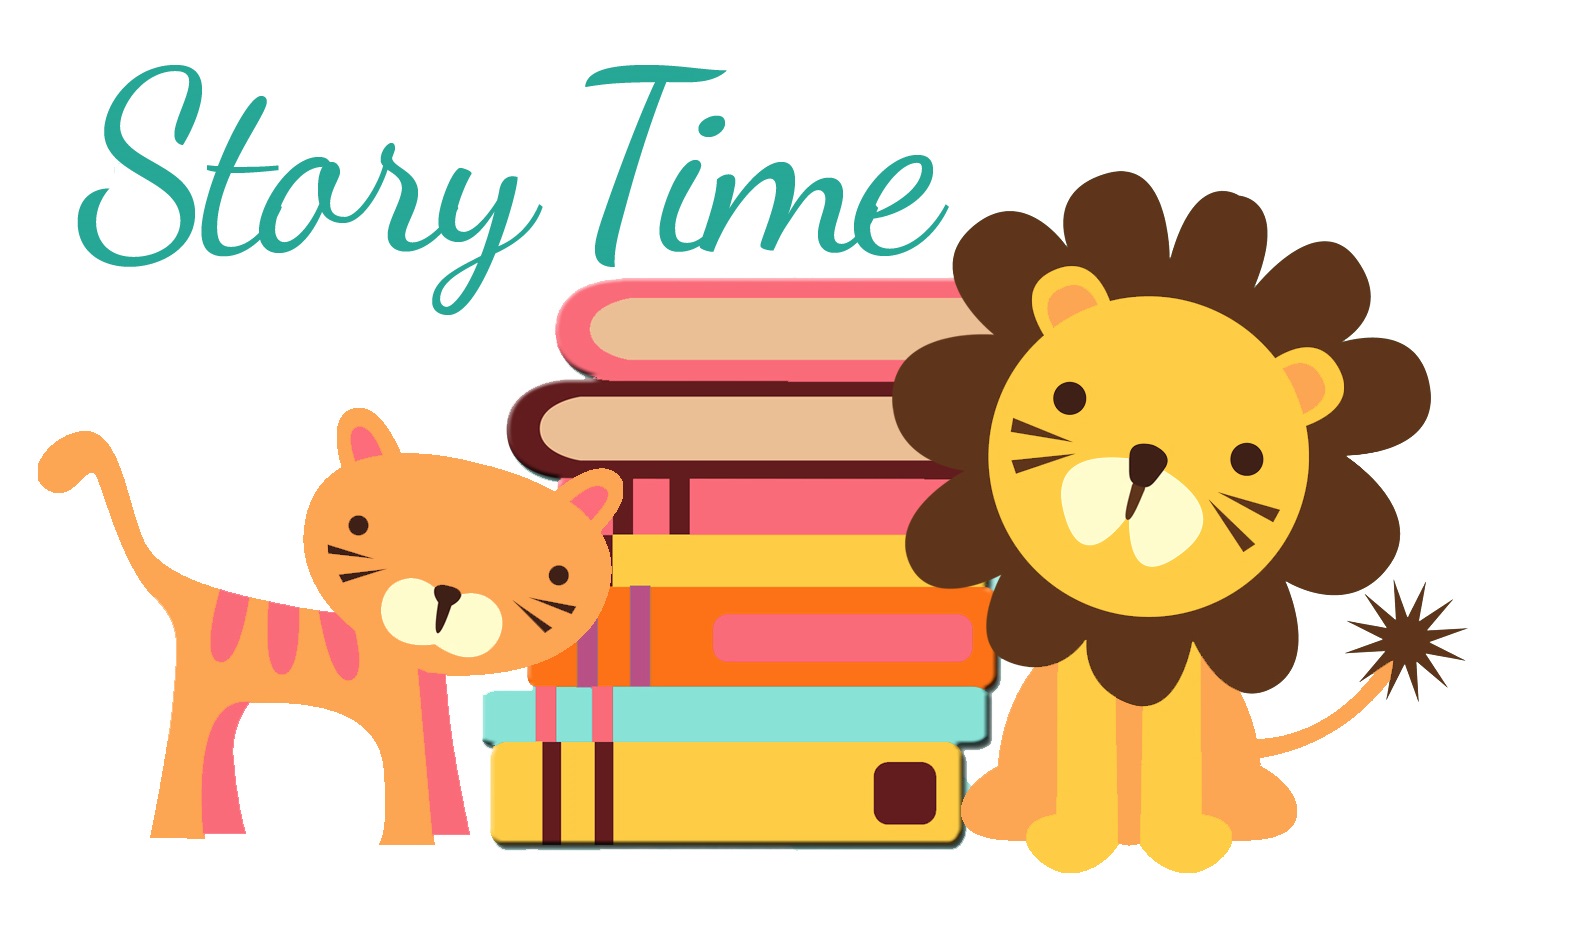 Story Time with Lion, cub and books